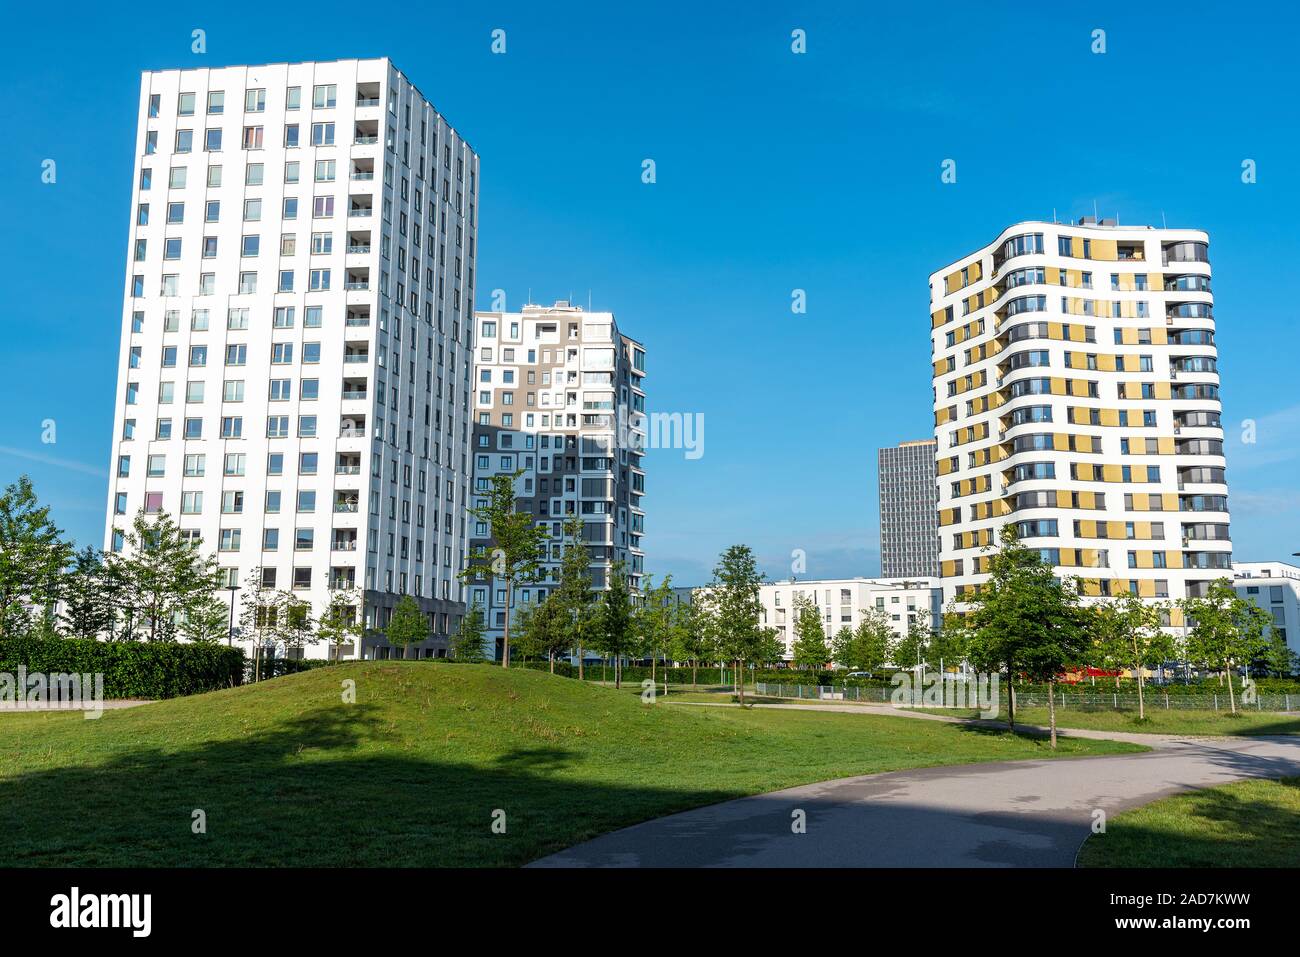 Modern multistory apartment buildings seen in Munich, Germany Stock Photo